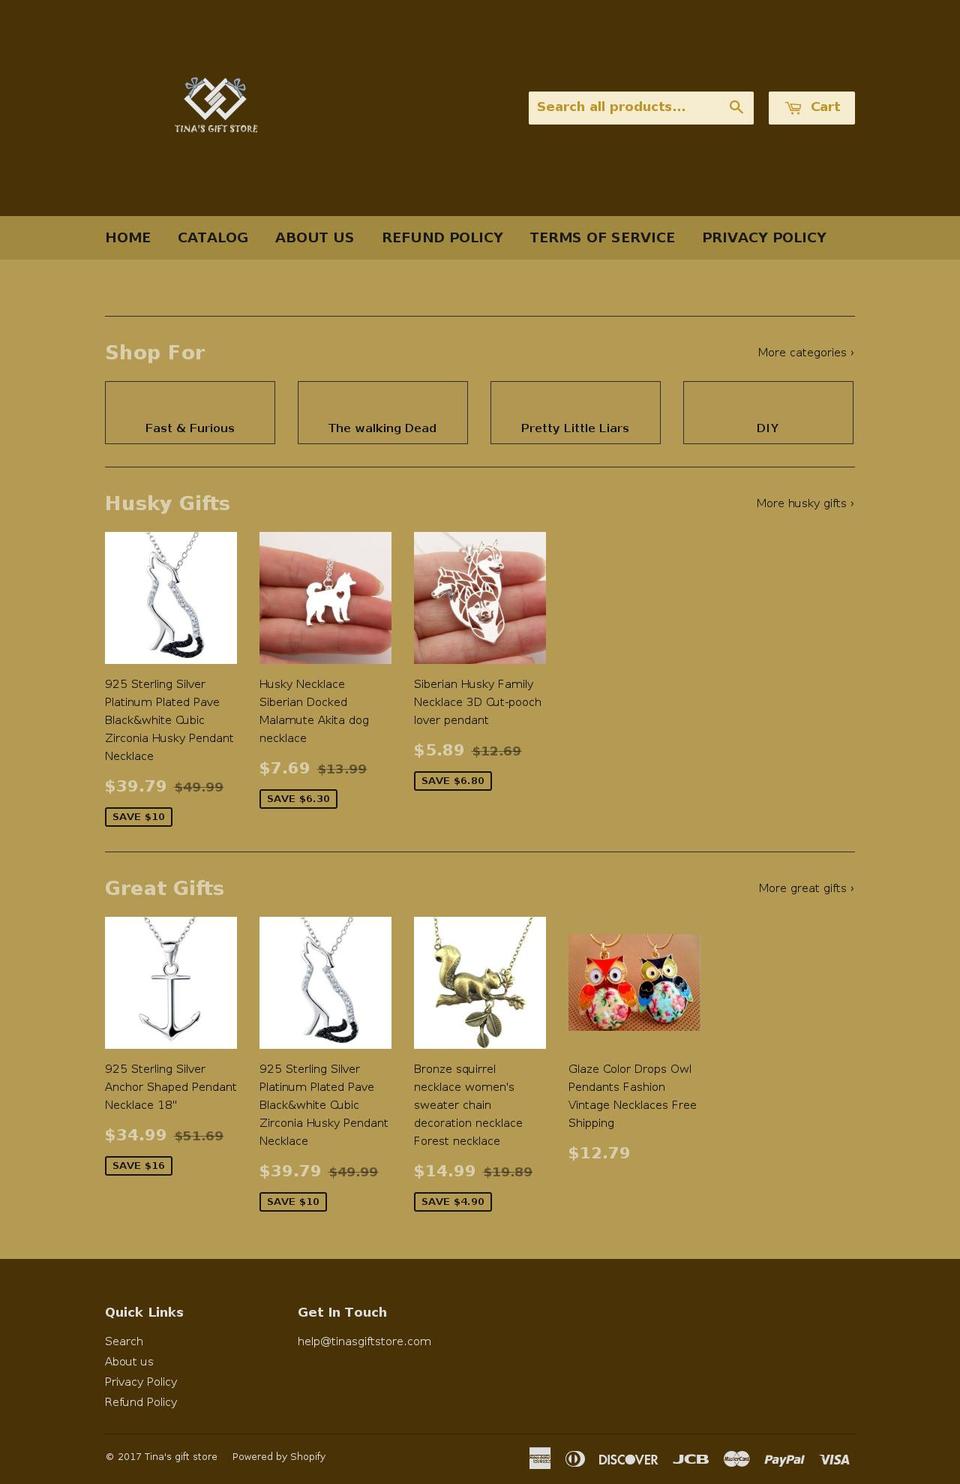 Avatar Shopify theme site example tinasgiftstore.com